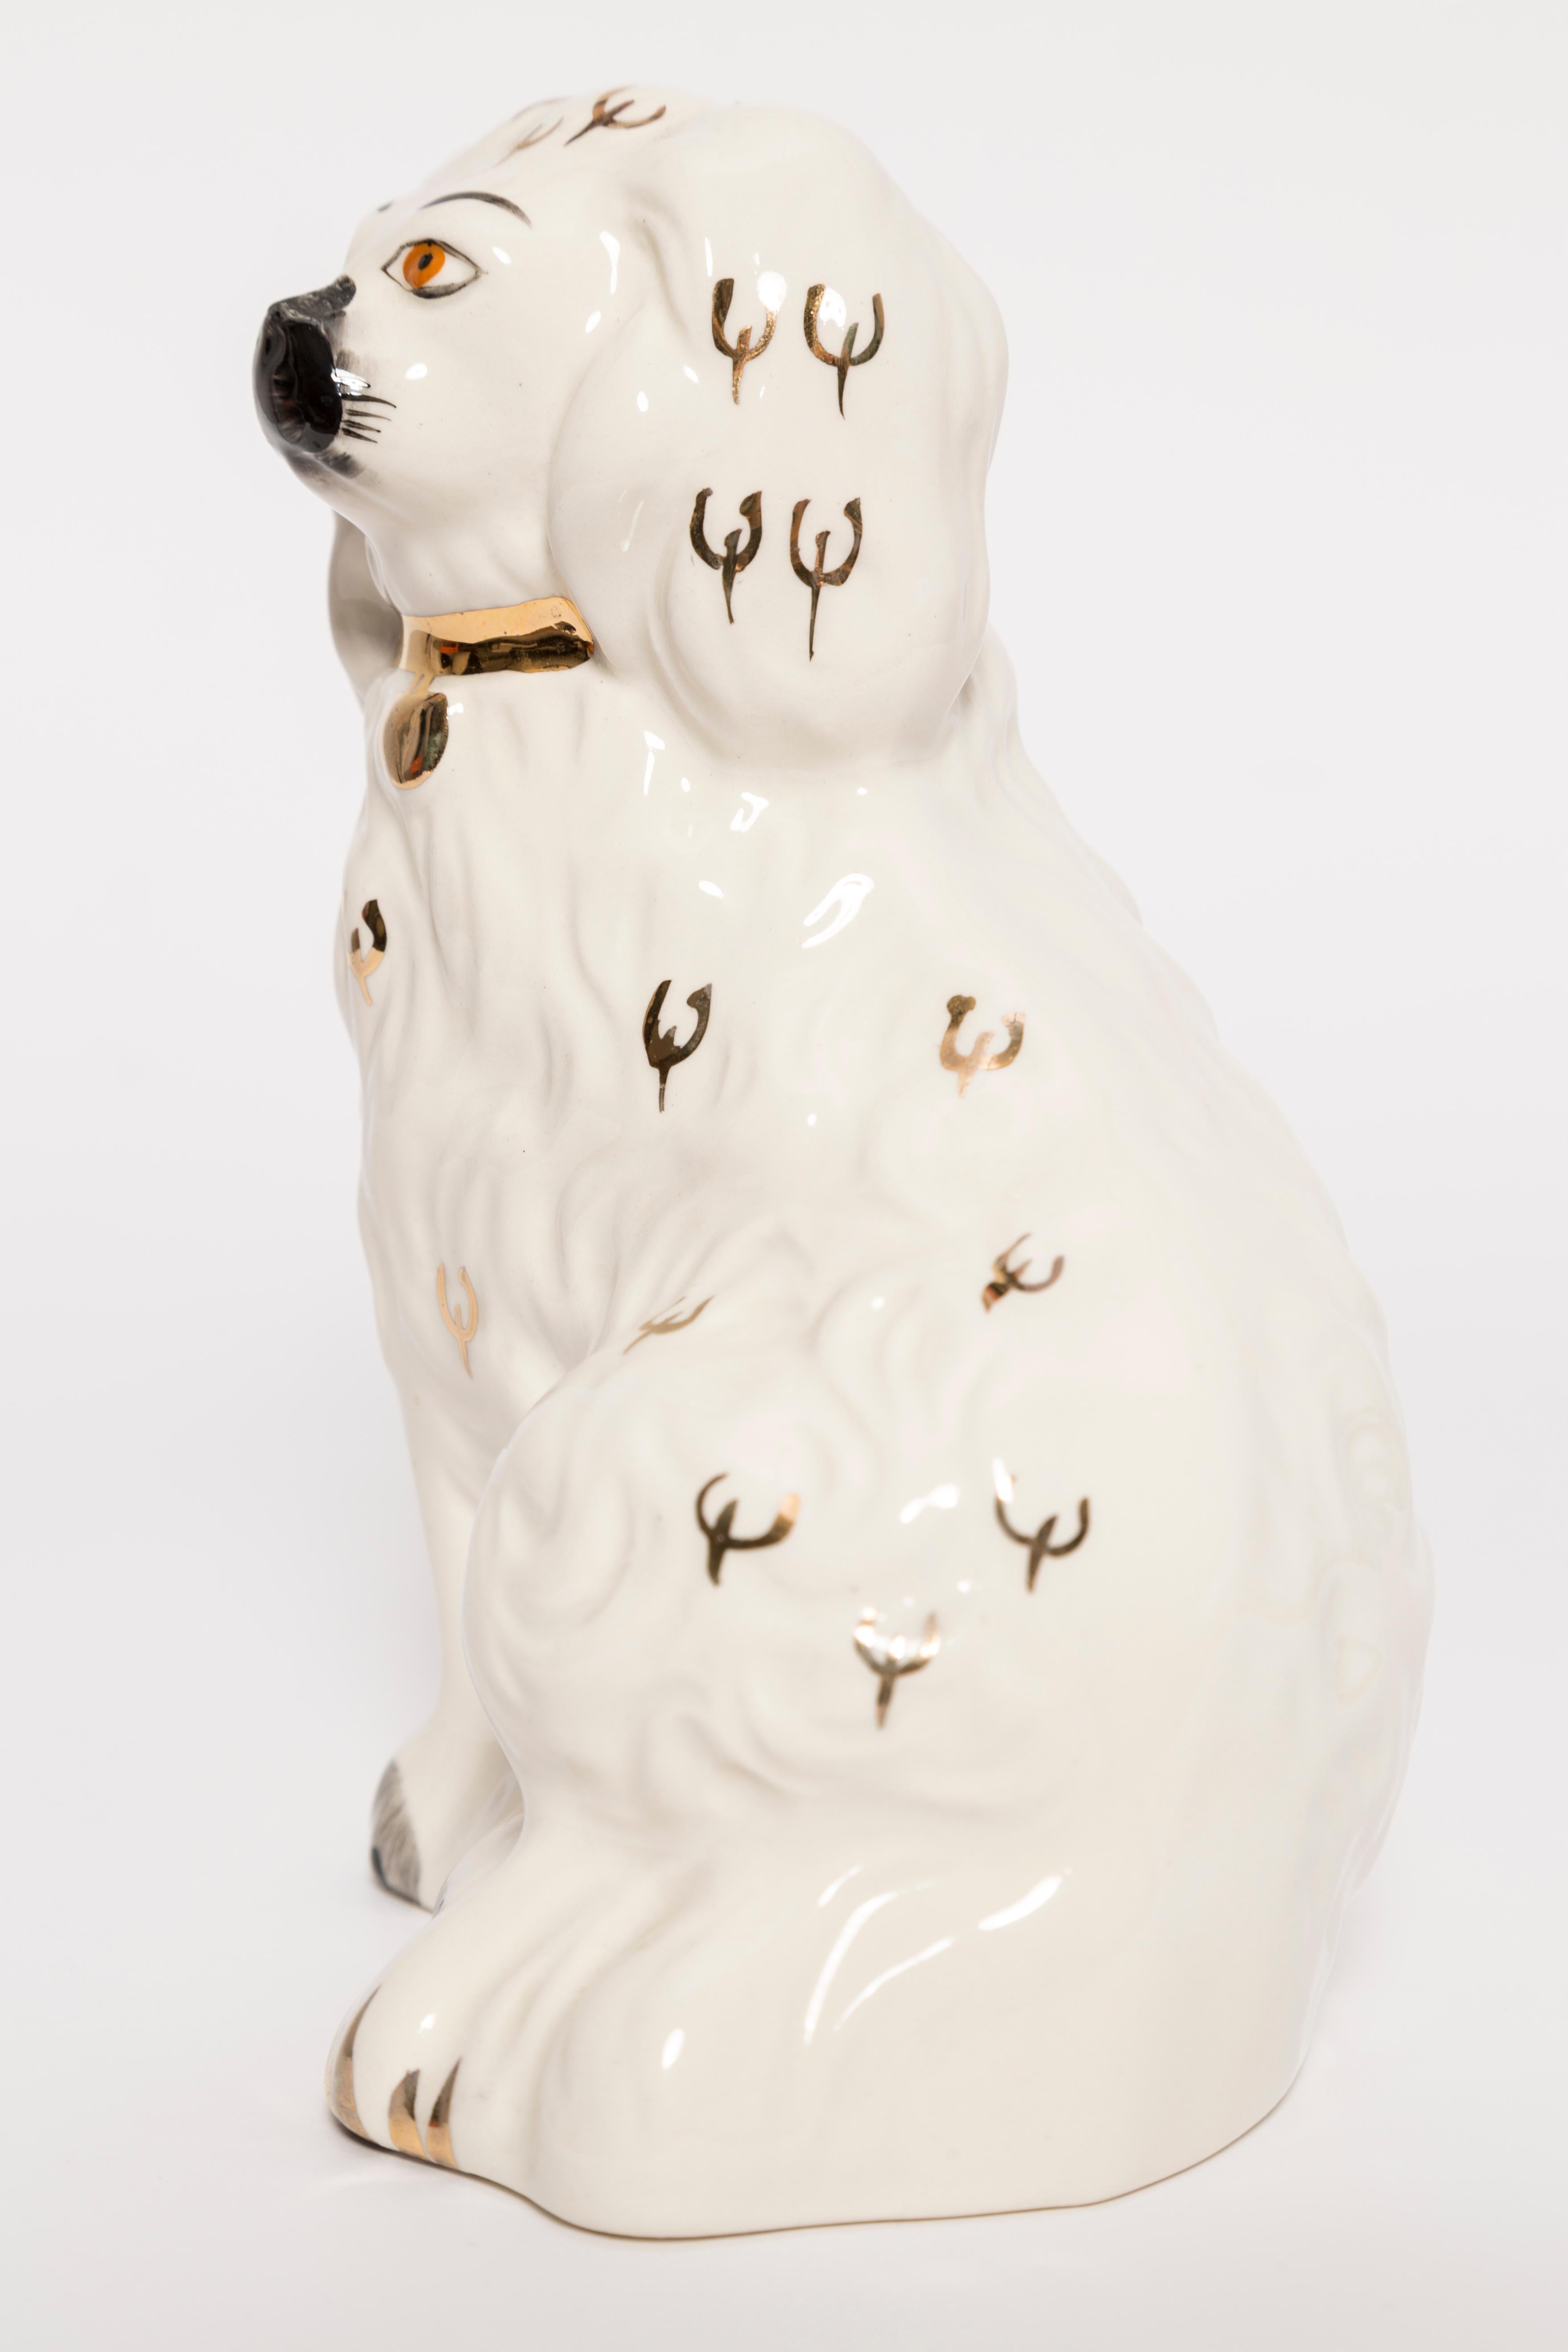 19th Century English Pottery Yorkshire Dog Sculpture Staffordshire England 1960s For Sale 3